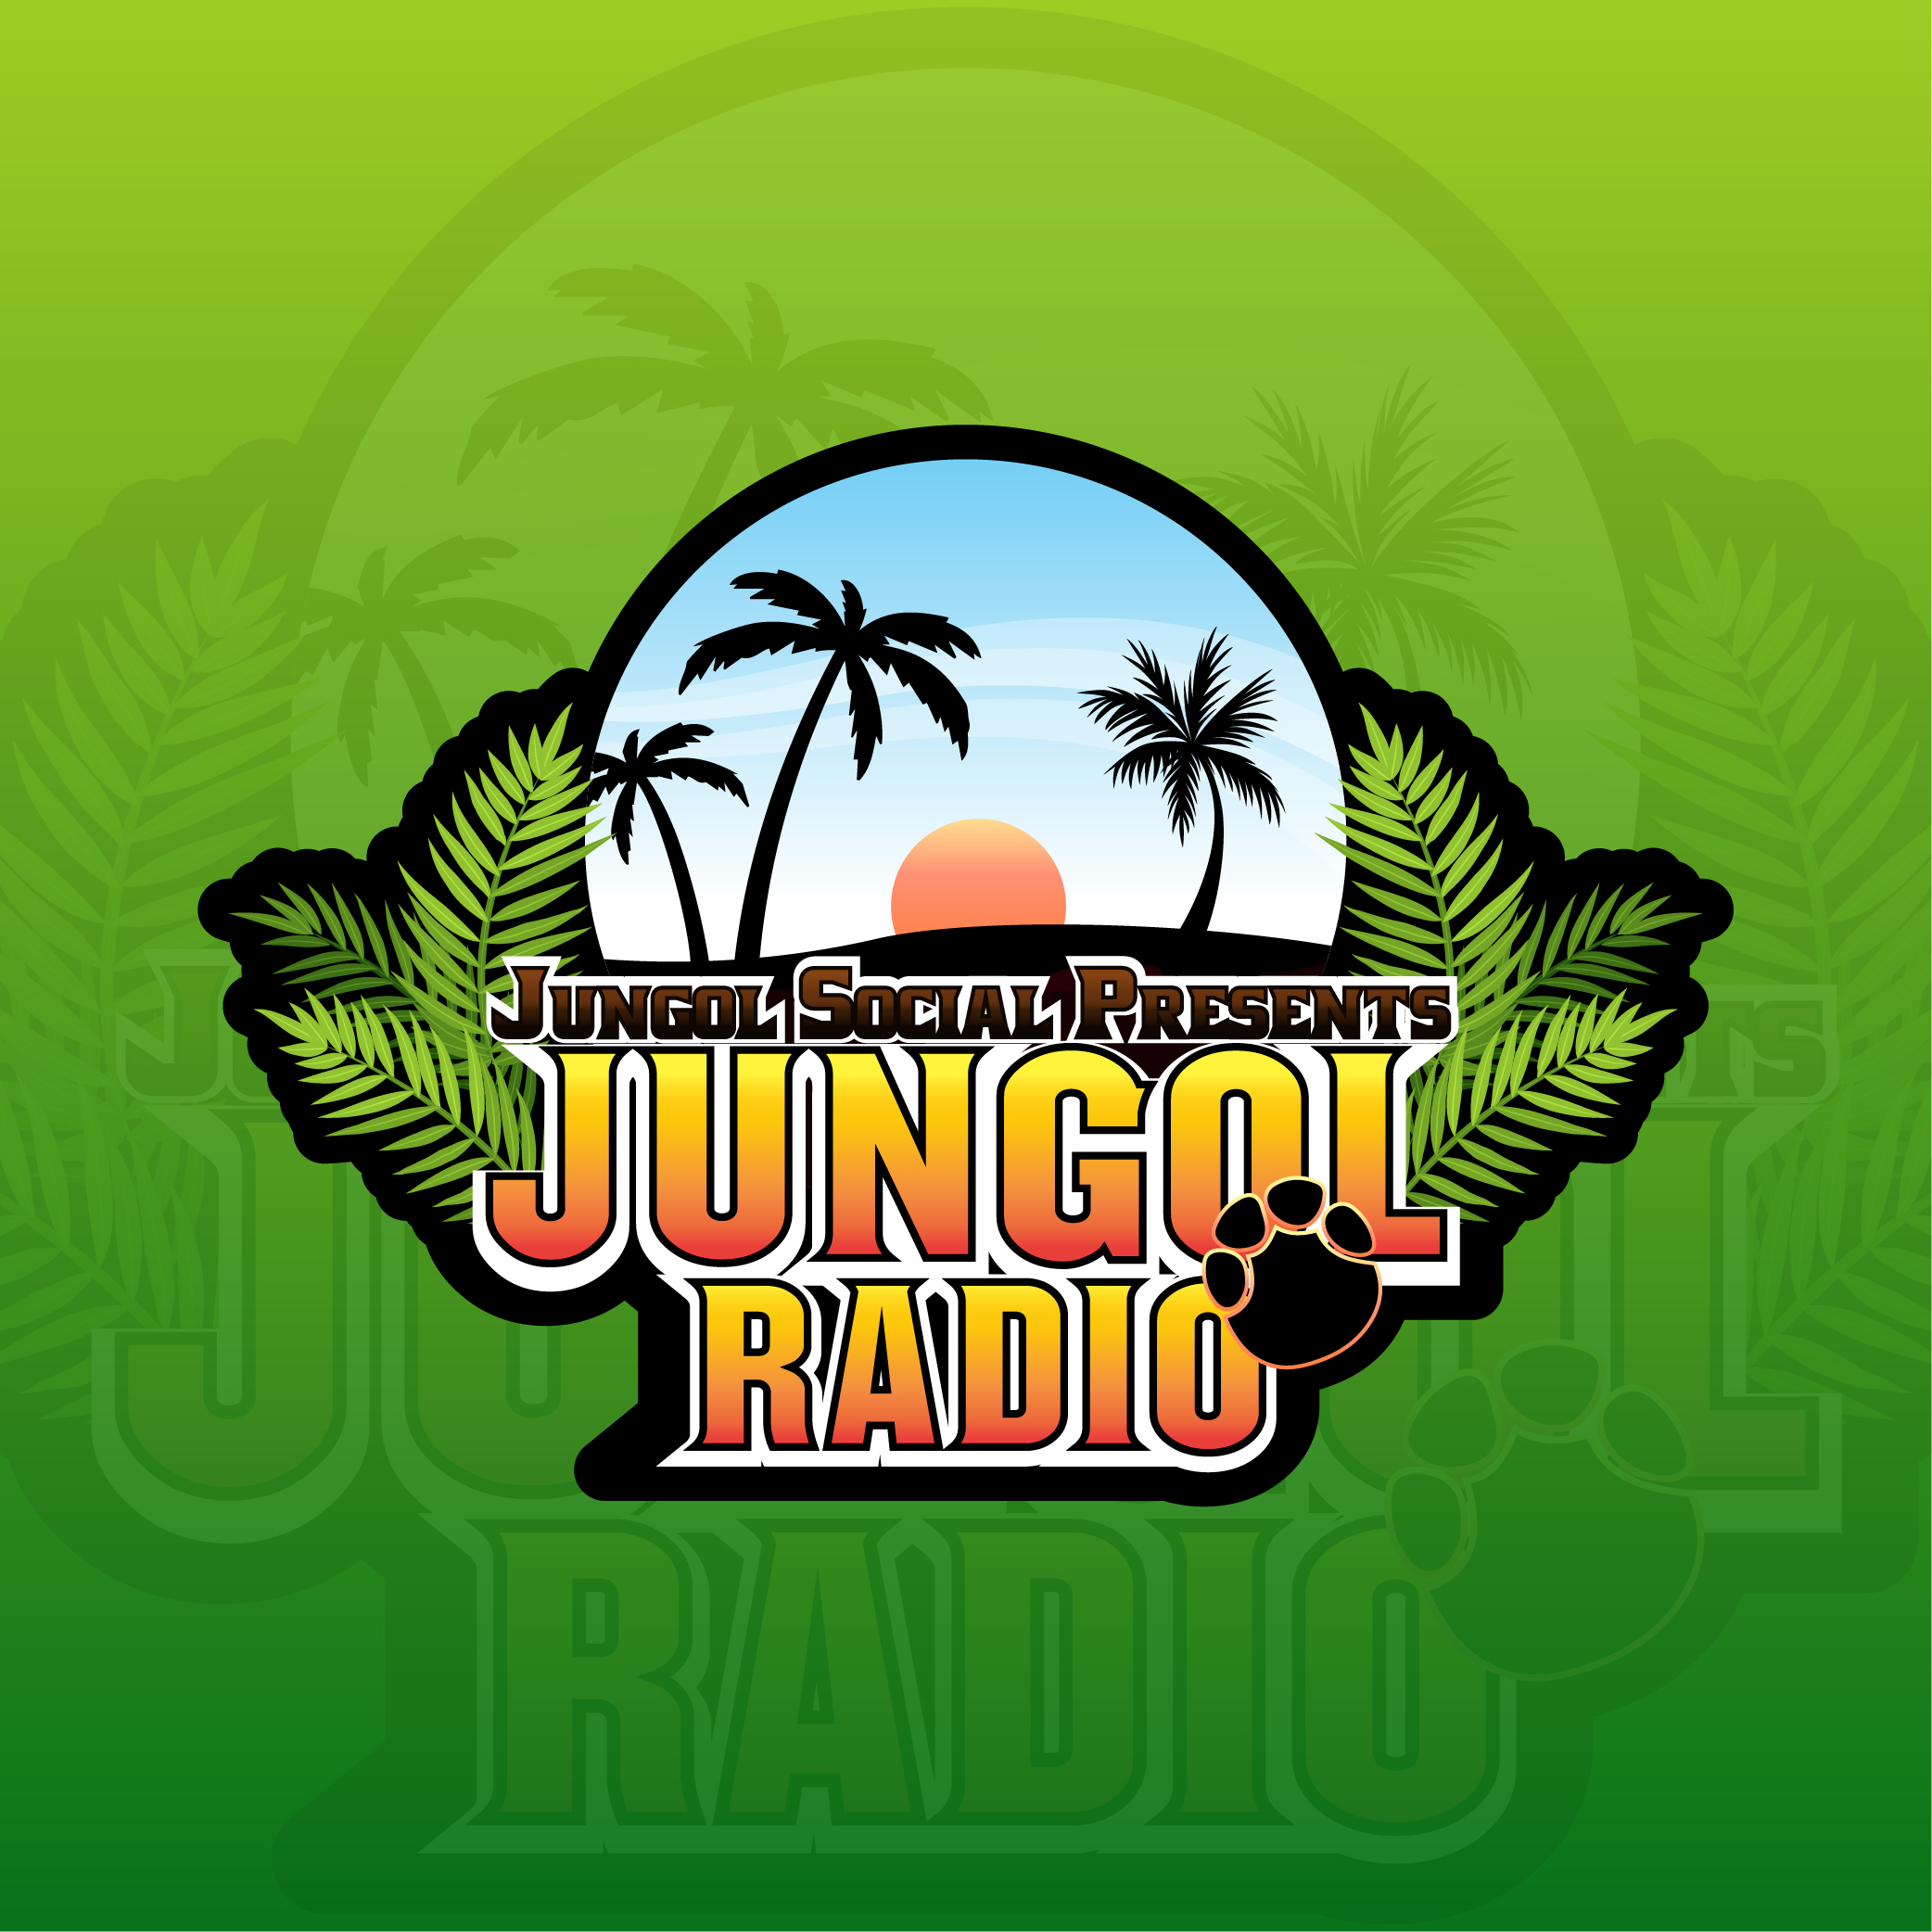 Art for #JUNGOLRADIO by 104.9FM